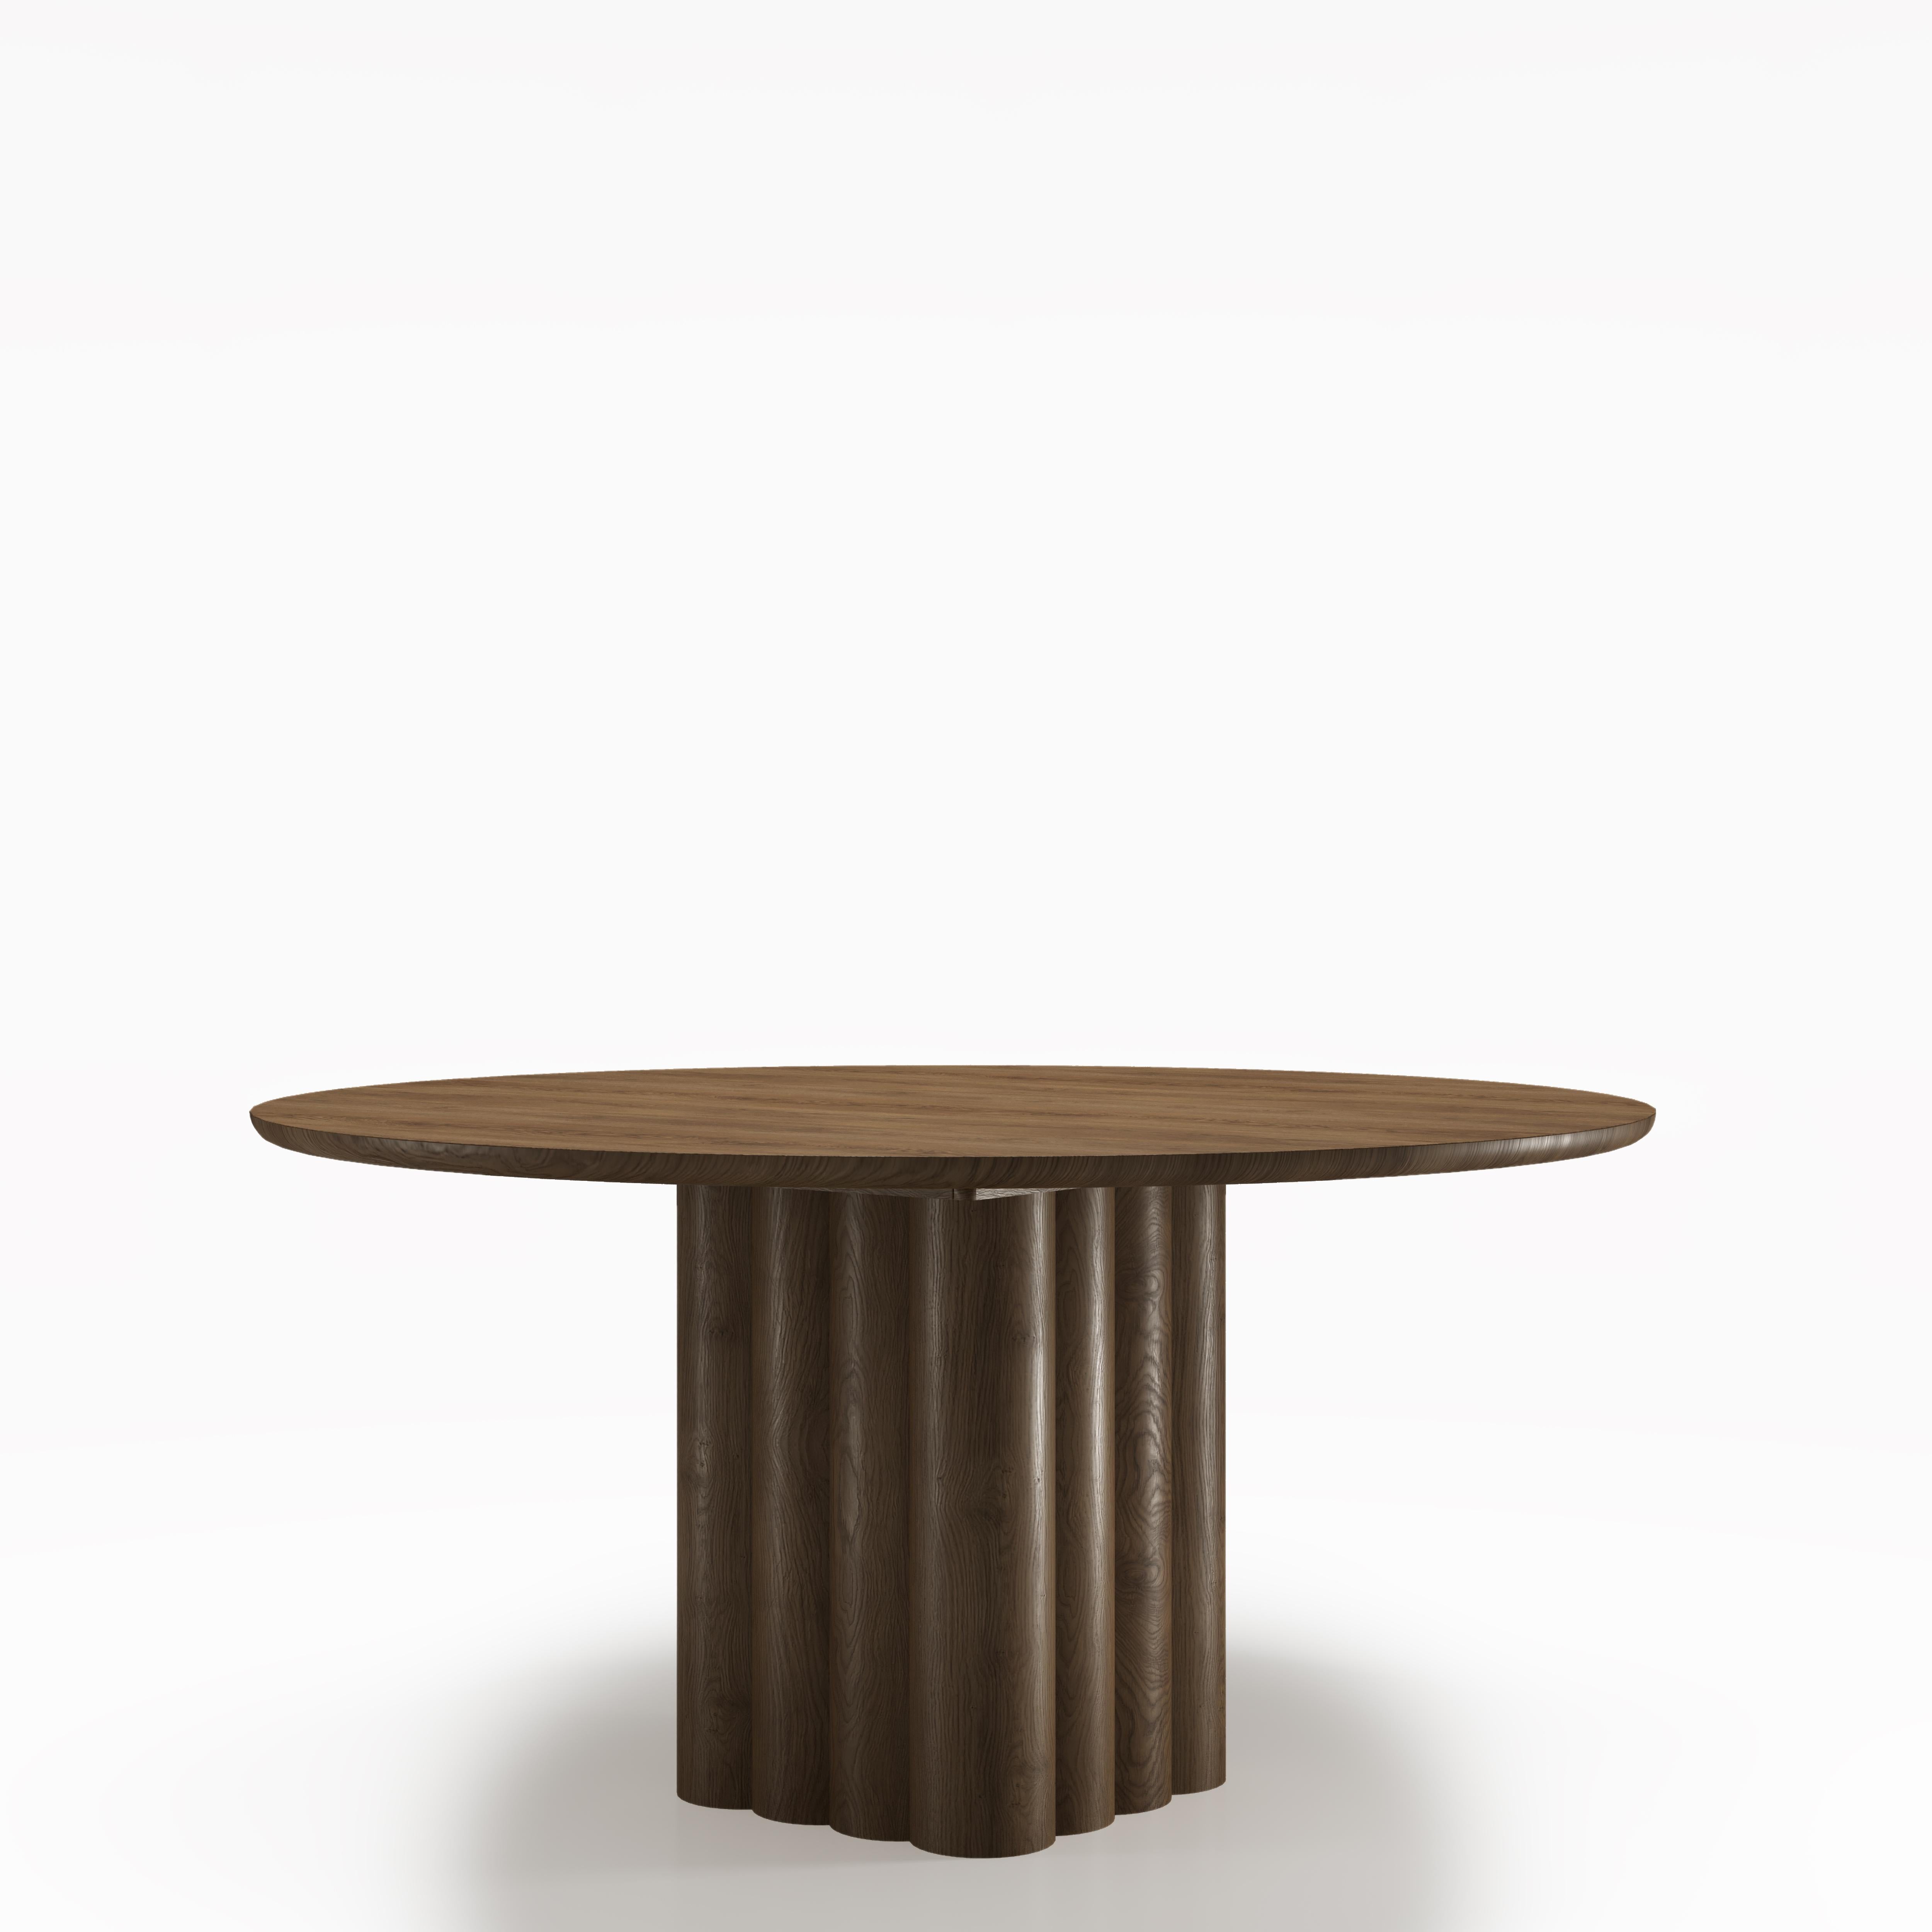 Danish Round Dining Table 'Plush' by Dk3, Smoked Oak or Walnut, 160 cm For Sale